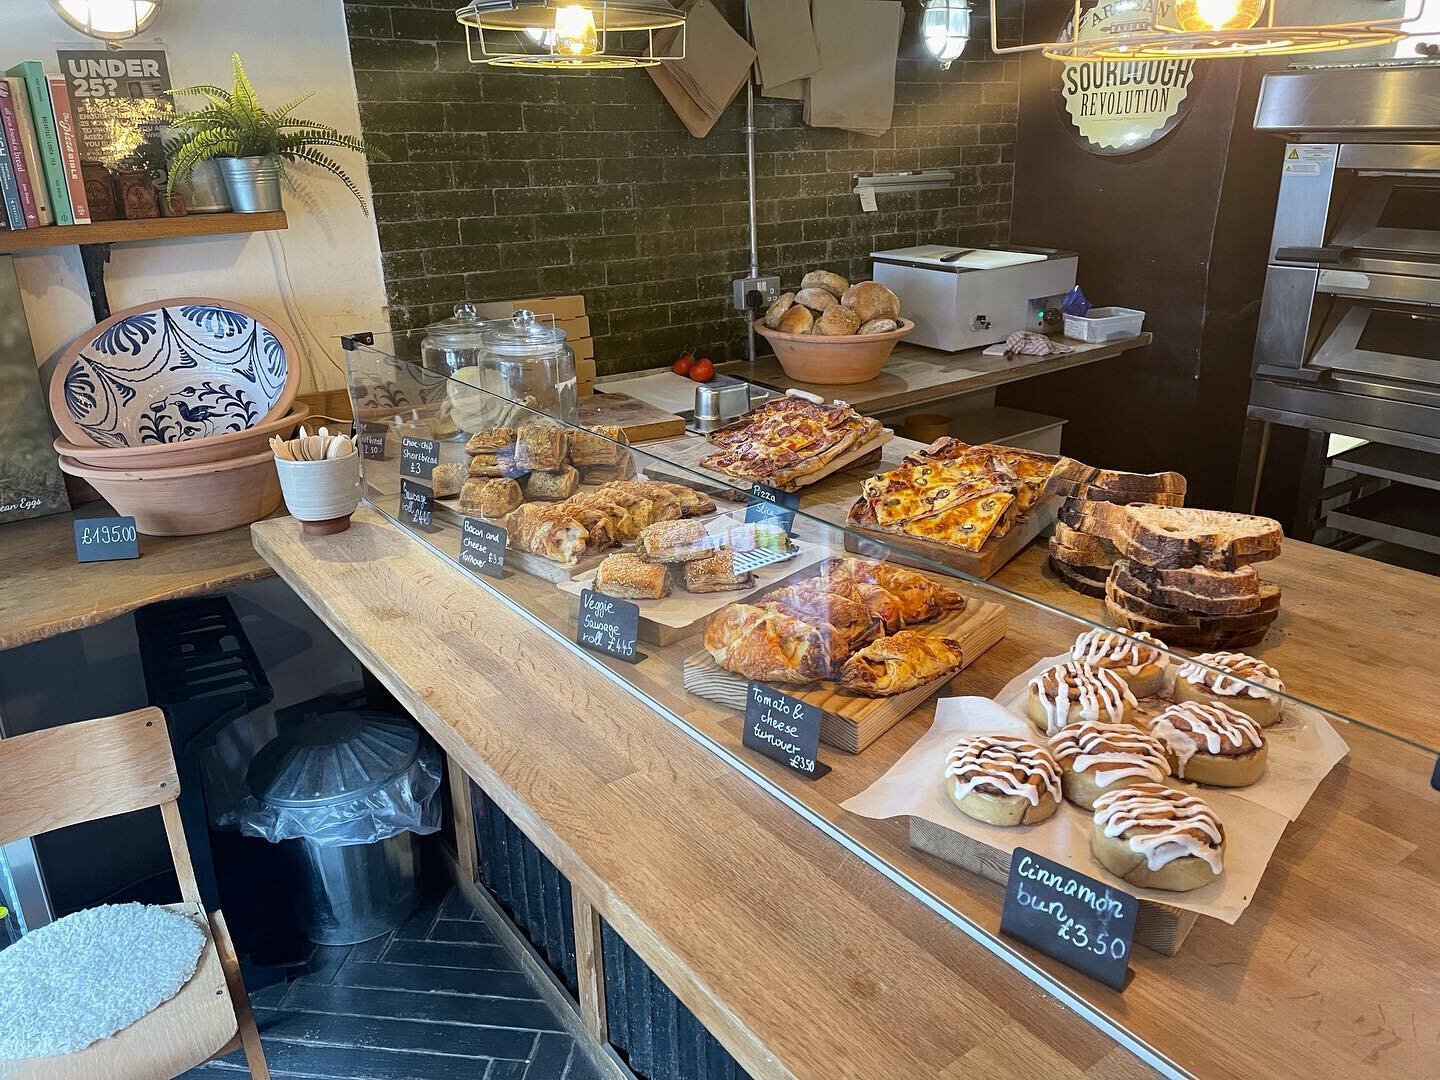 What do you guys think of our new, stunning takeaway counter? 😍 Remember that we are also open until 5:30 today for late pickups!!

#bakery #tasty #sausagerolls #dontmissout #sourdough #sourdoughrevolution